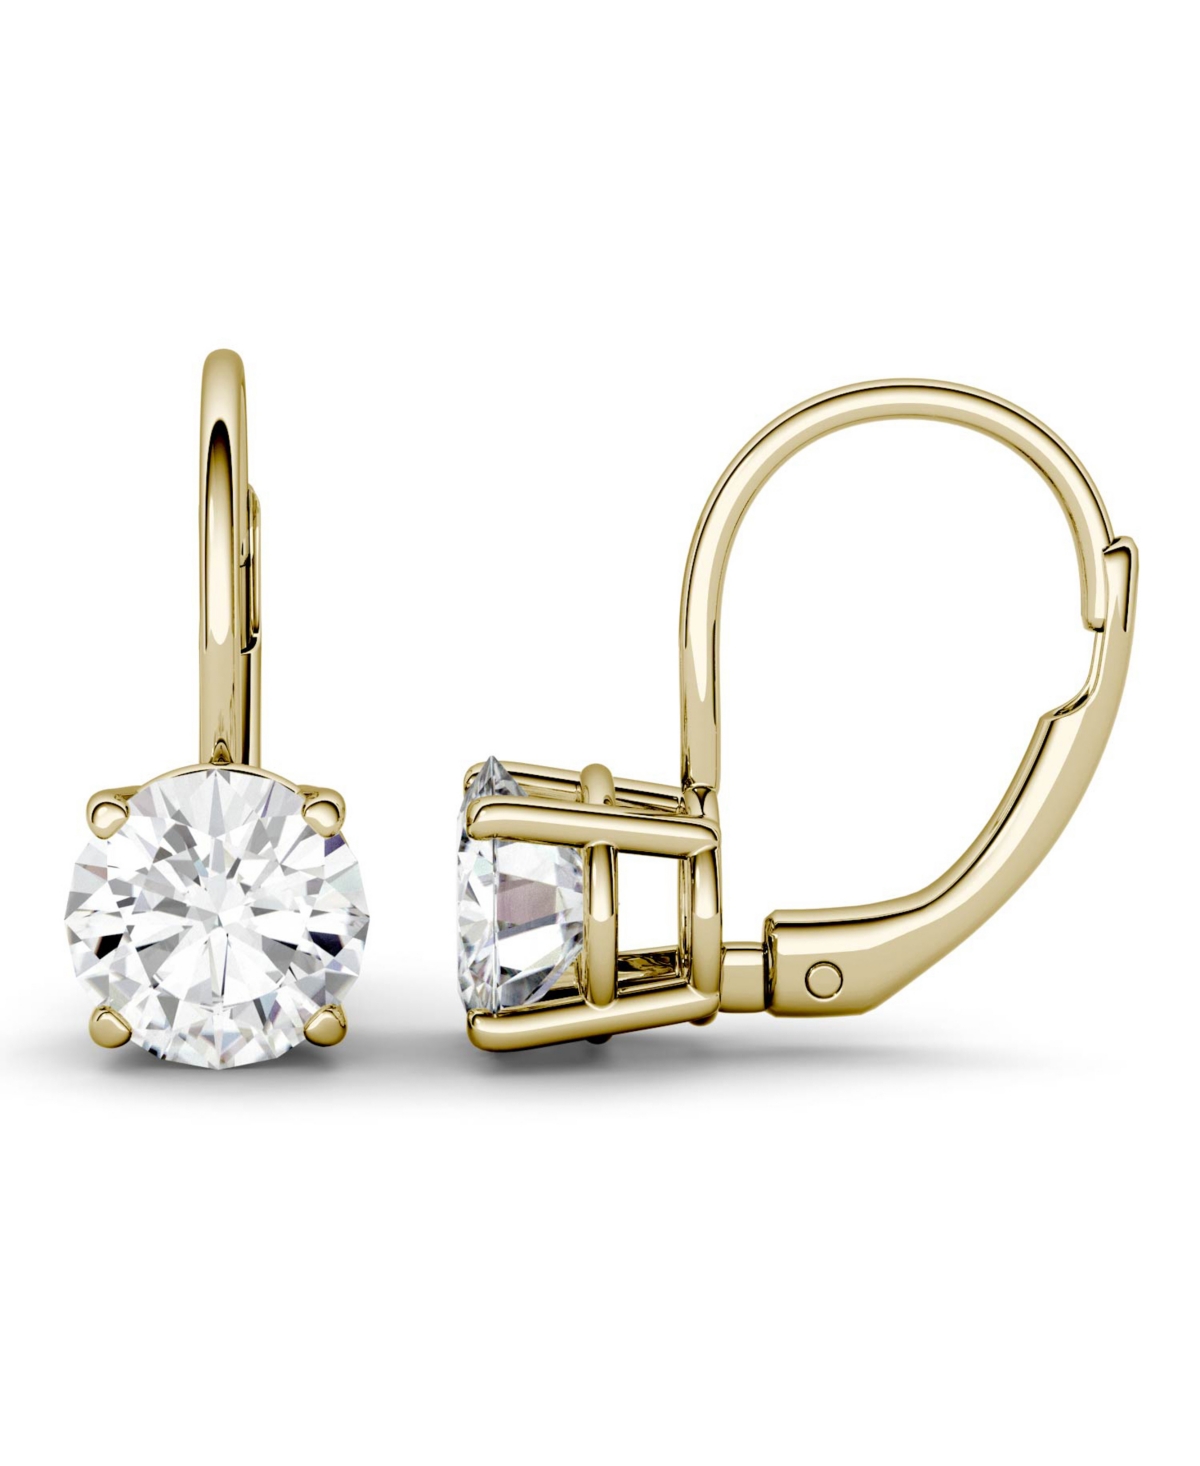 Charles & Colvard Moissanite Leverback Earrings (2 ct. t.w. Diamond Equivalent) in 14k White or Yellow Gold